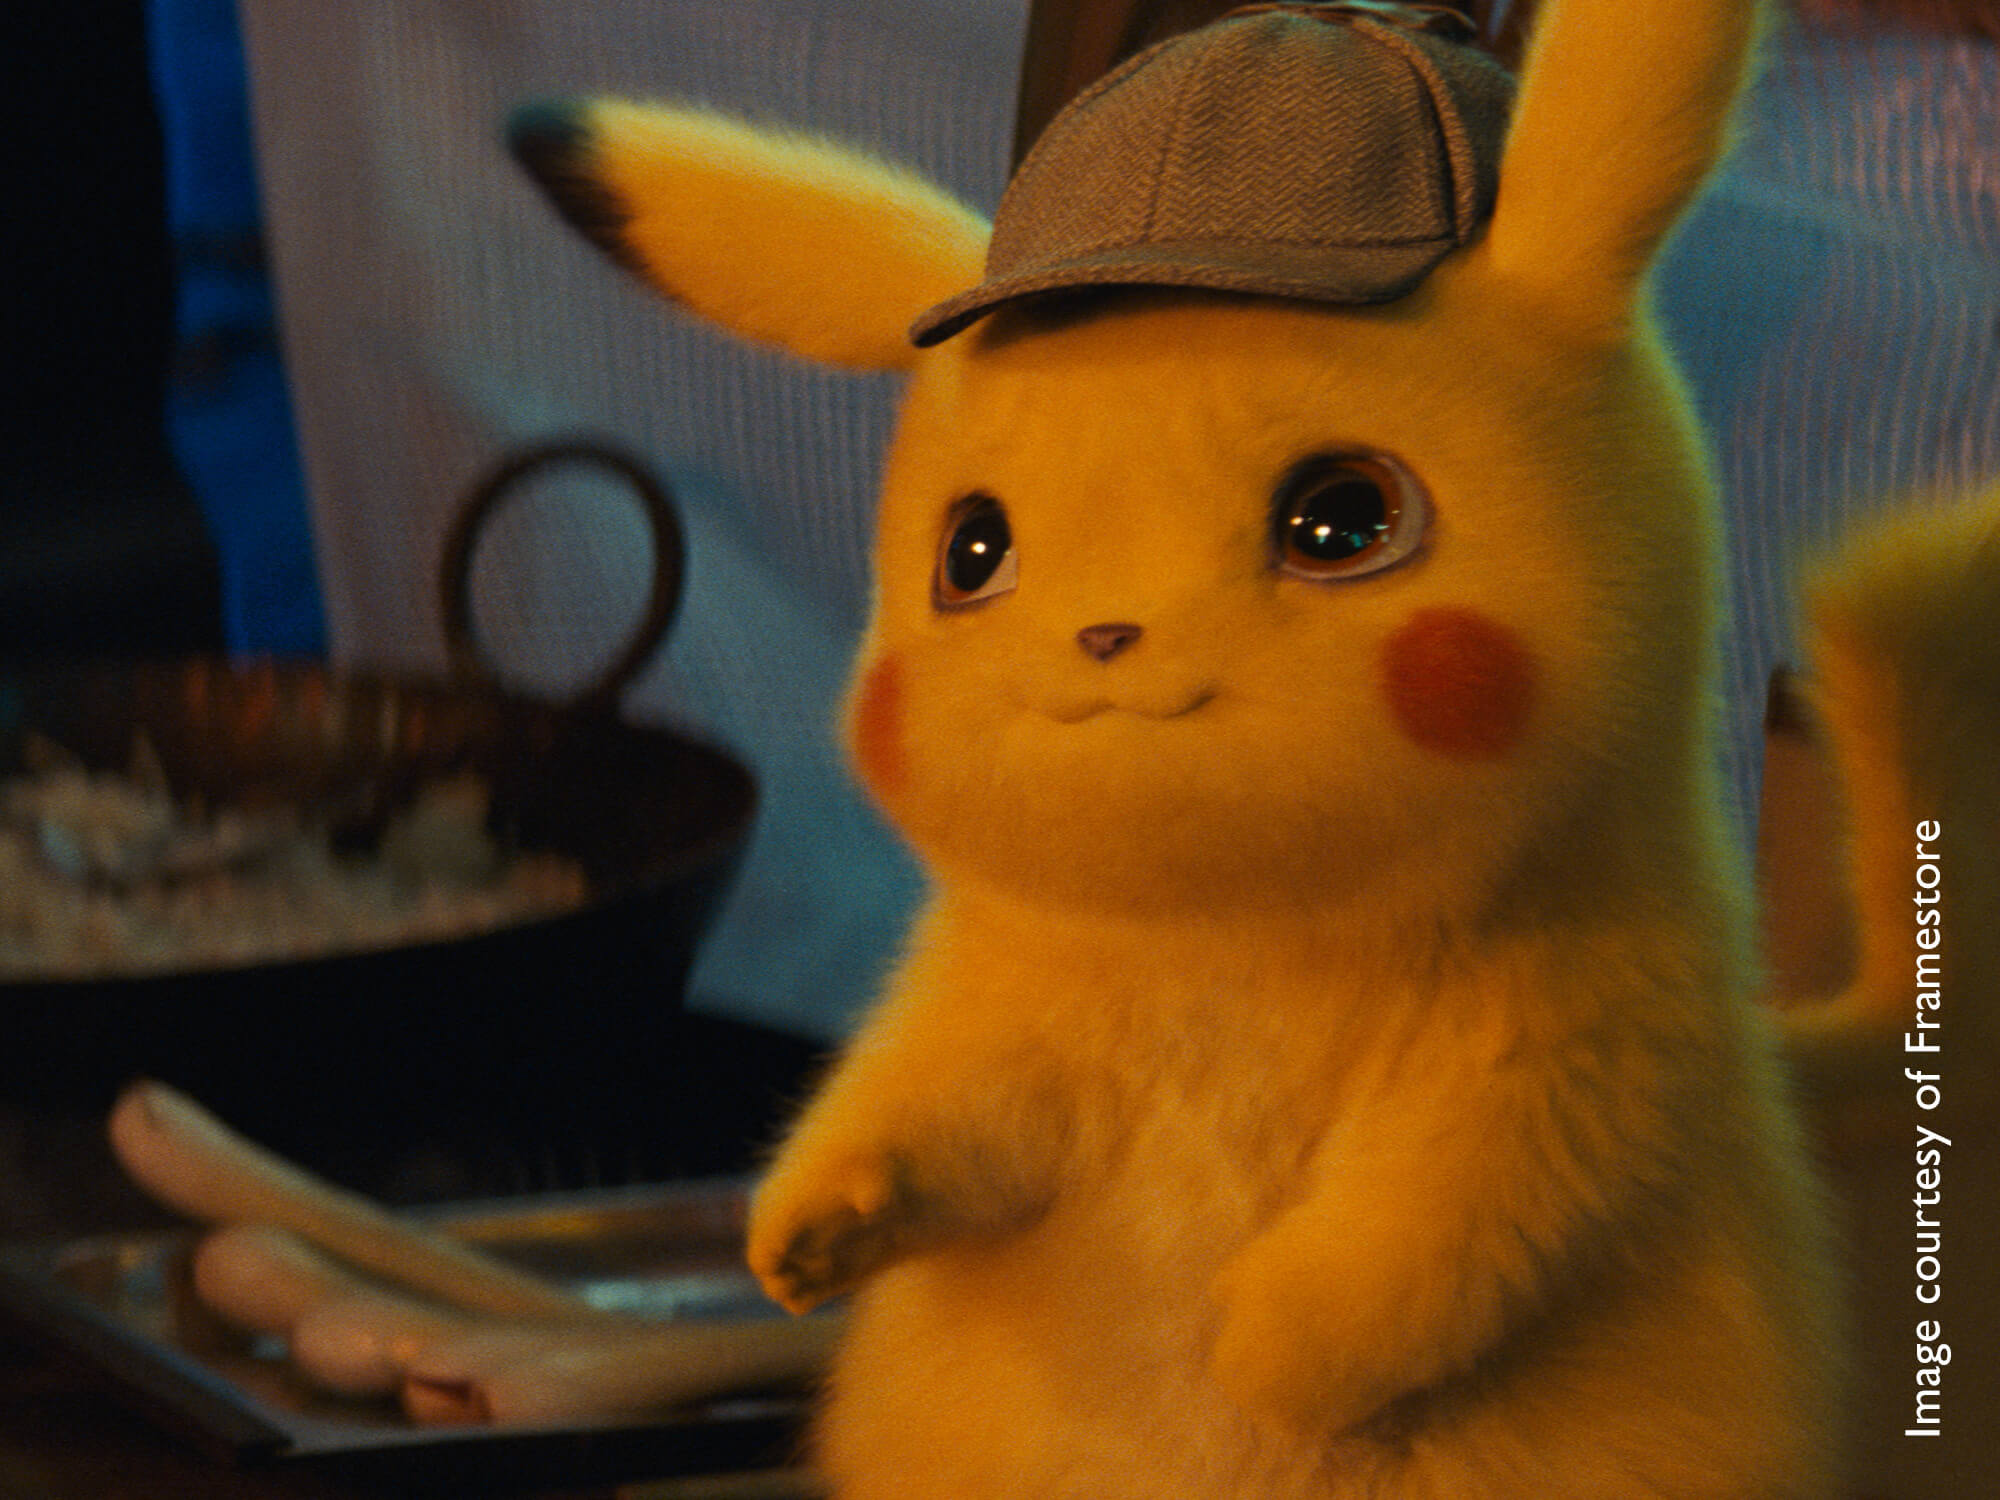 3D animated Pikachu character wearing a detective cap